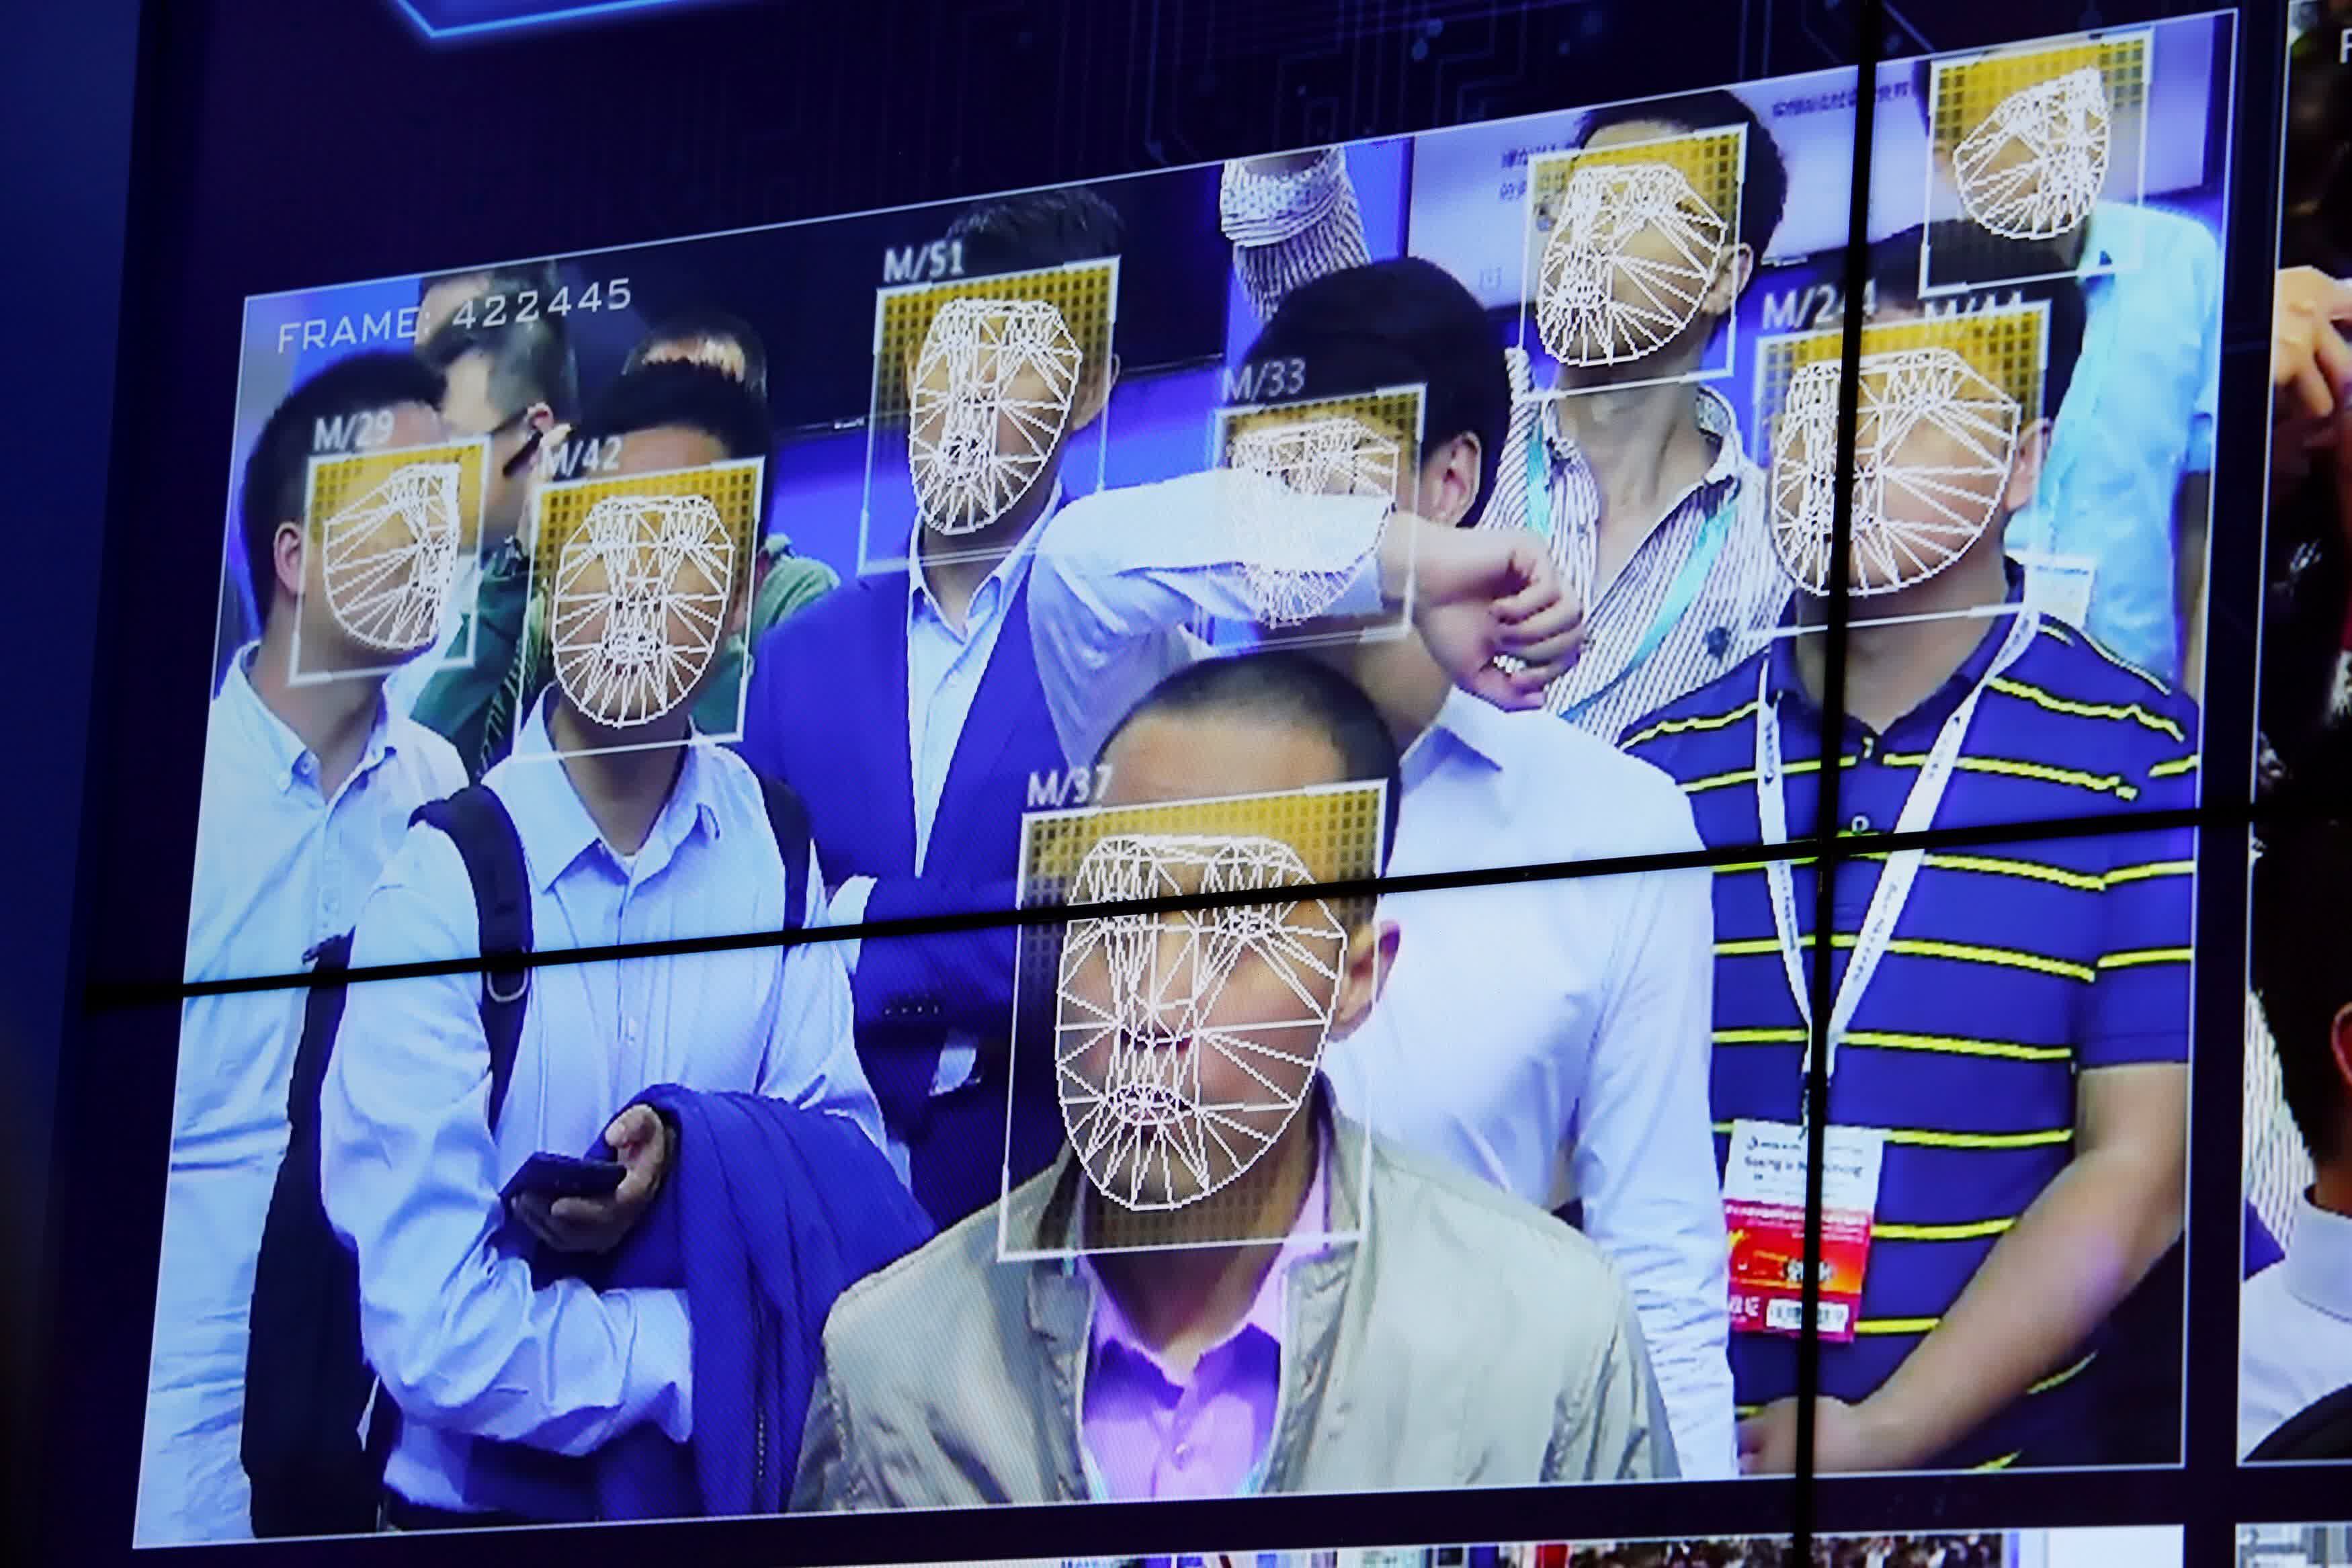 China has plans to make Minority Report a reality for its citizens